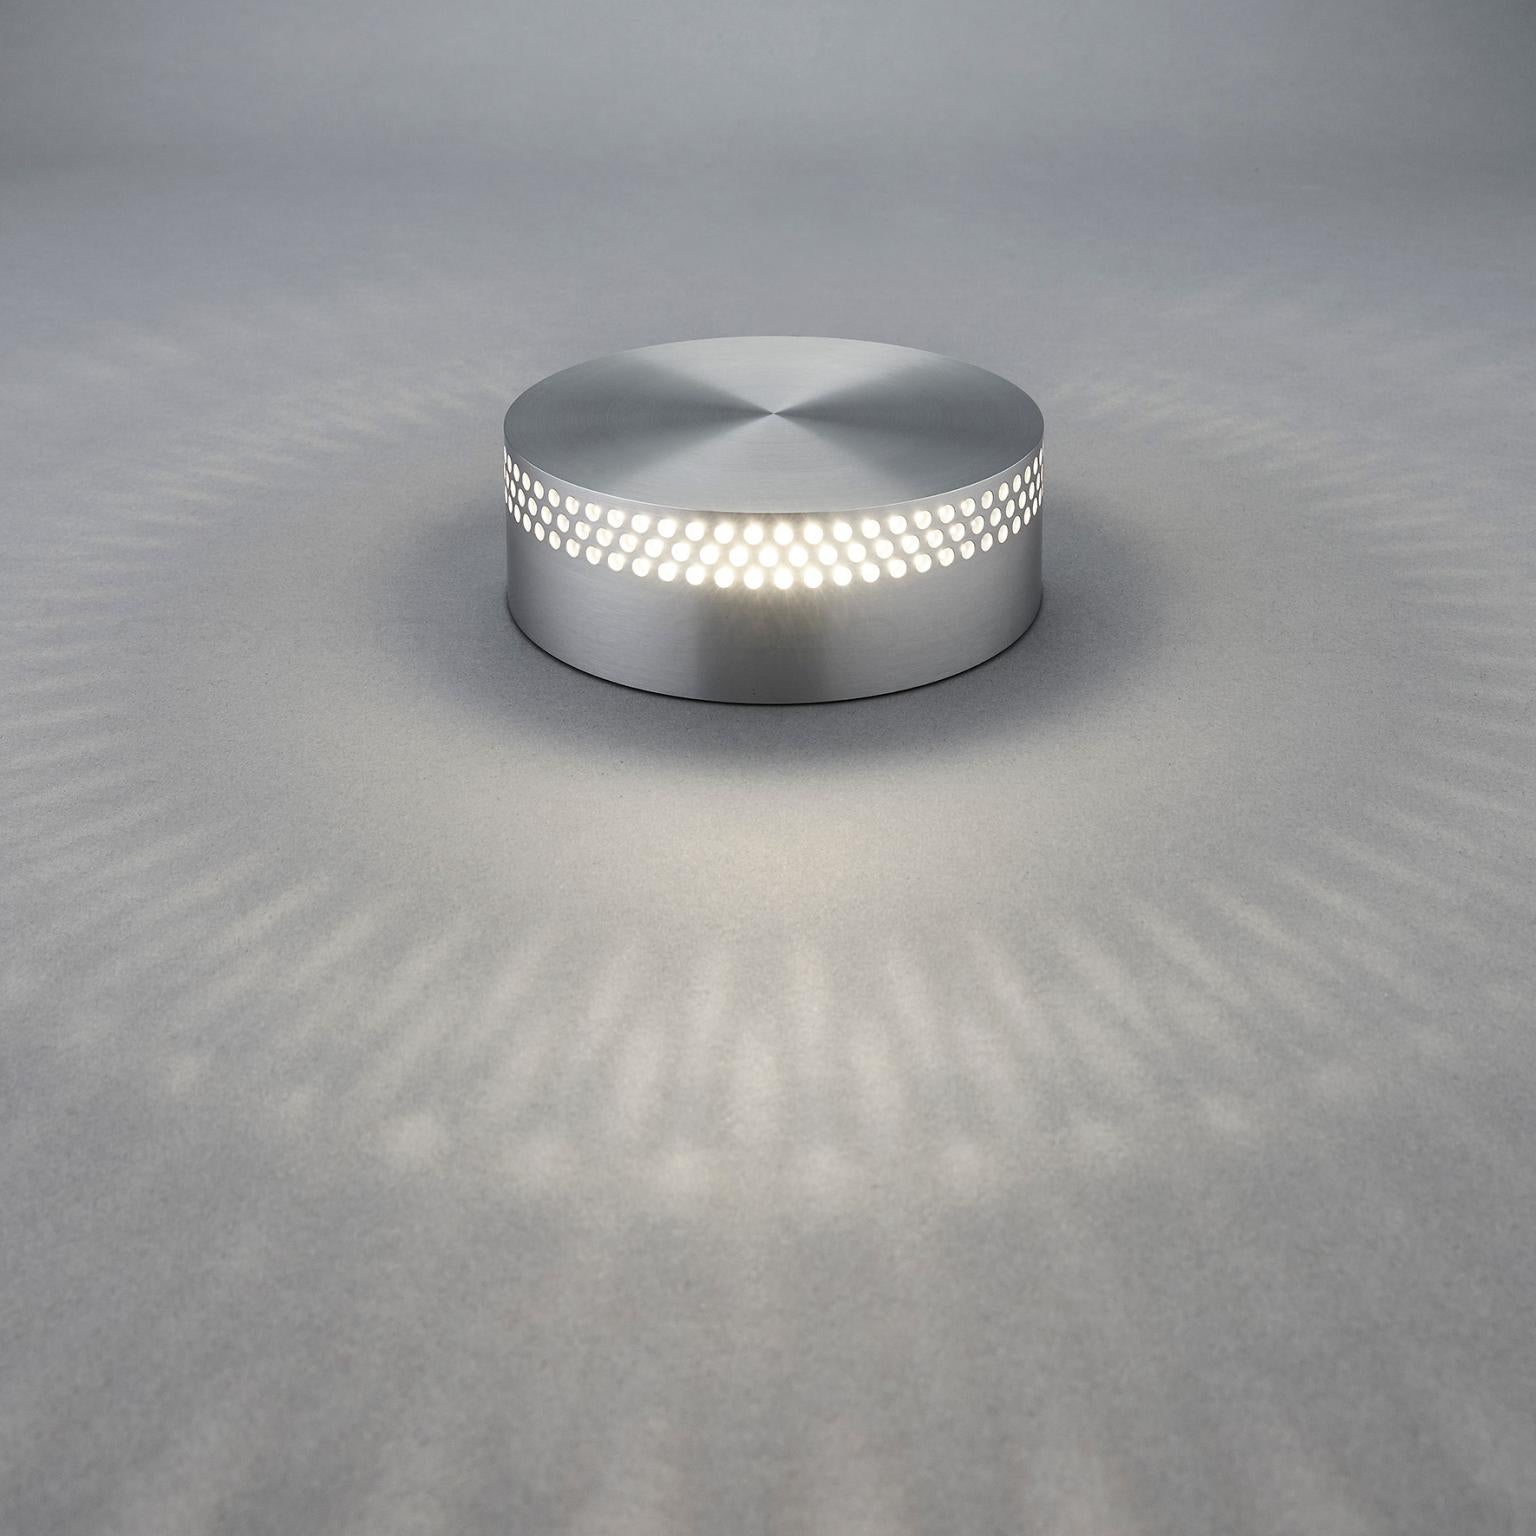 Veen2 by mnima. Table light sculpted from solid aluminum. 360 degrees of pin-point precision lighting. Modern. Minimal.

Physical
Material 6061 aluminum
Finish clear anodize shown
Weight 2.1lb

Electrical
Input 90-264Vac 50-60Hz
Output 9Vdc